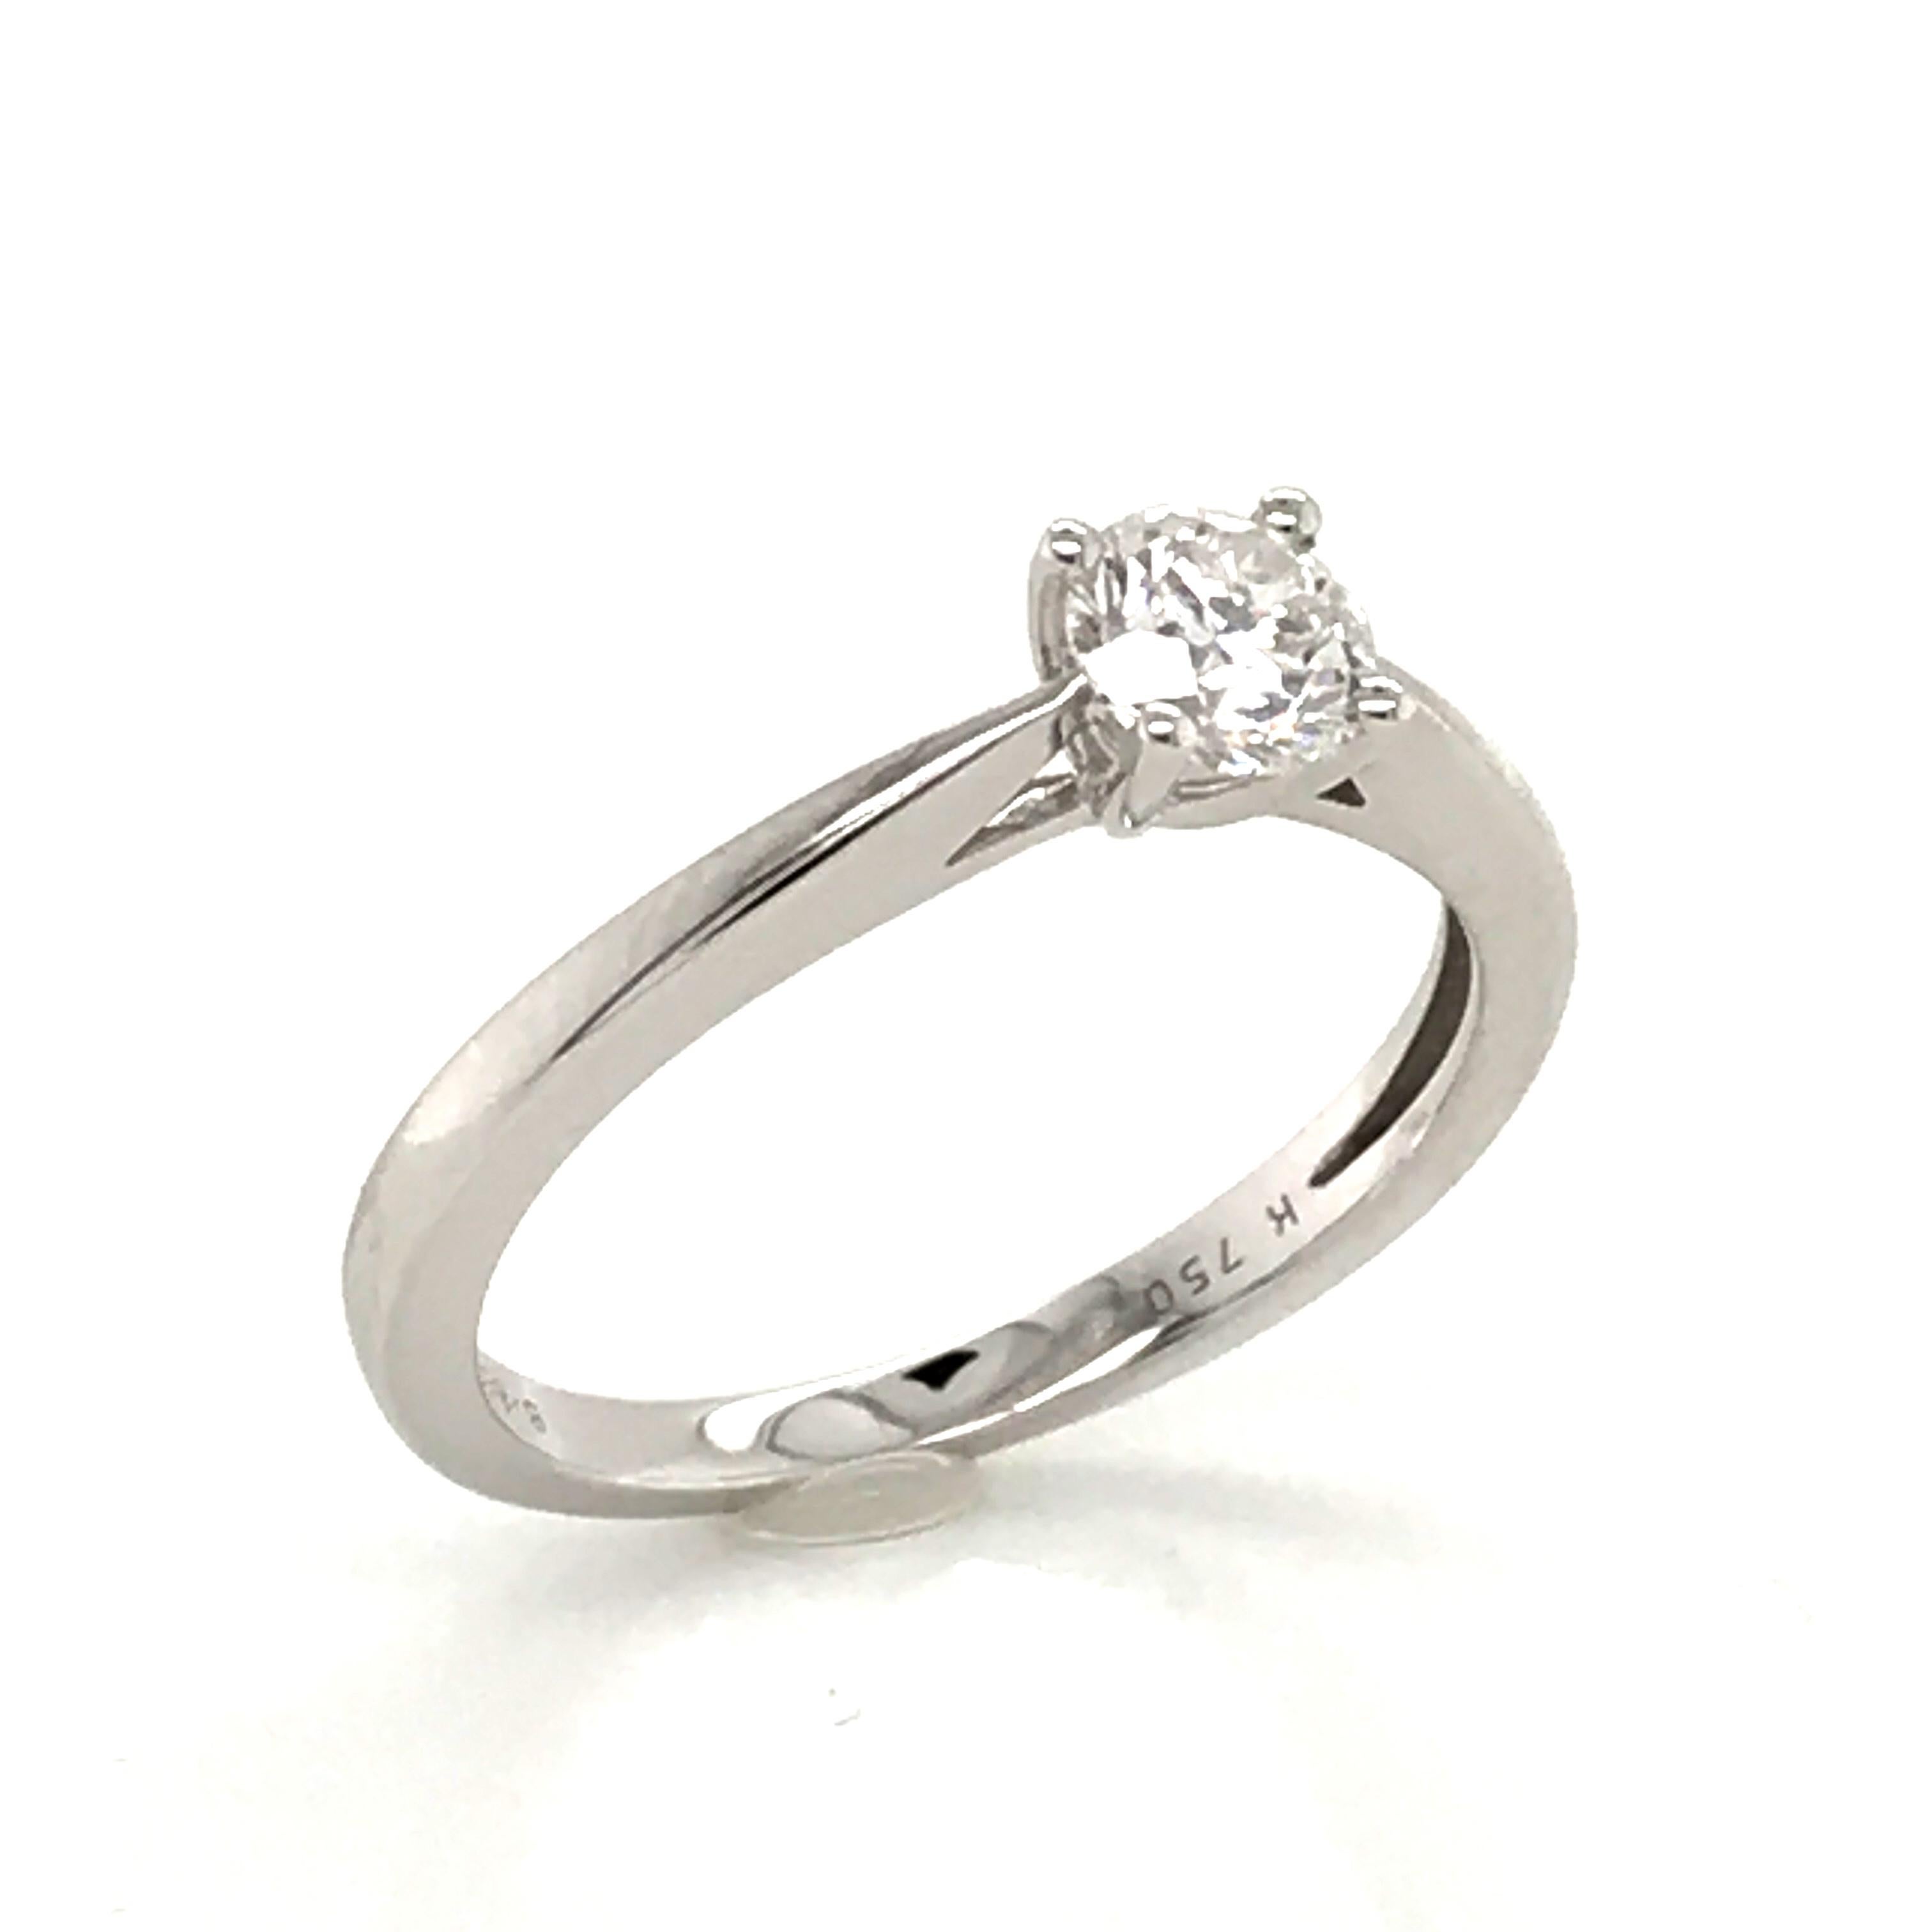 Contemporary Solitaire Ring White Diamond Certified Color F White Gold 18 Karat For Sale